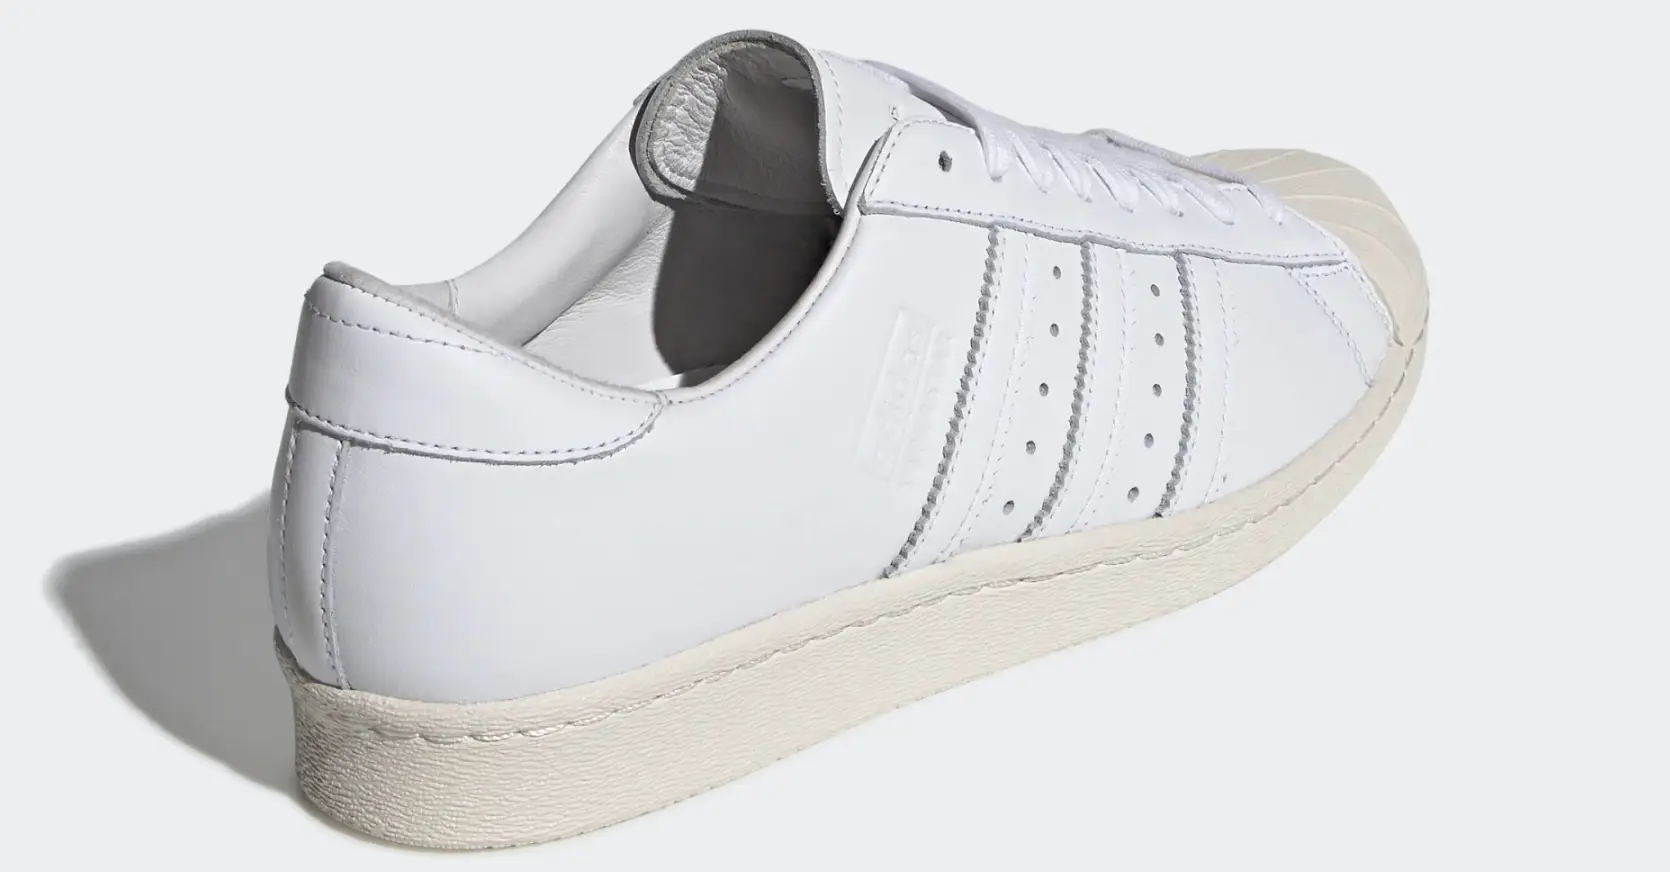 adidas Are Releasing A Collection Of Cloud White Silhouettes For Summer ...